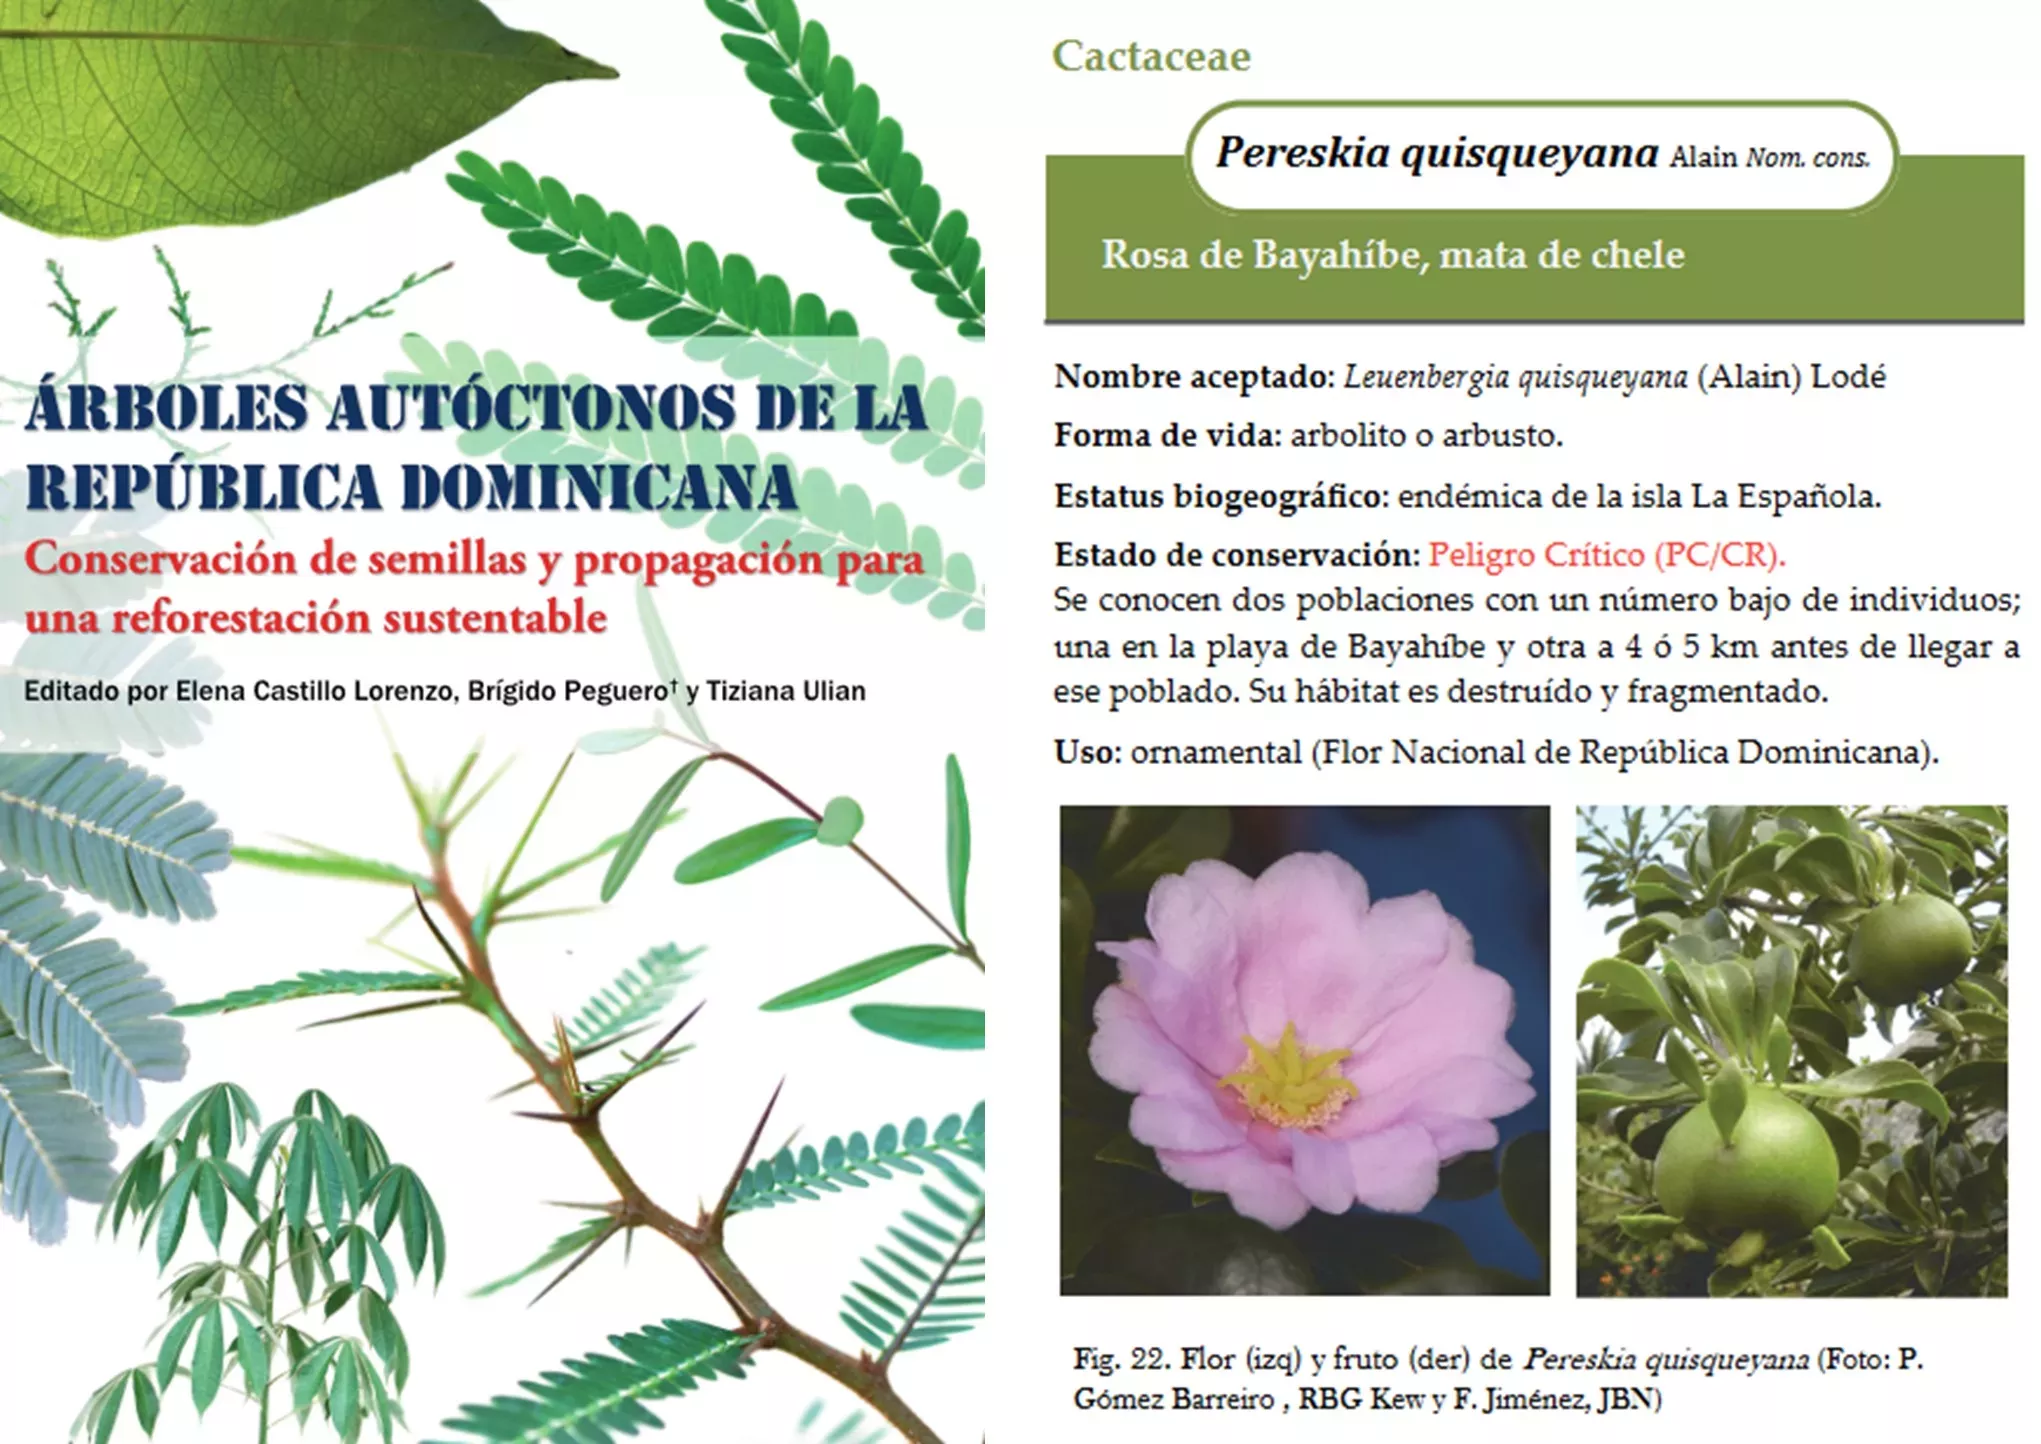 A book cover of arboles autoctonos de la republica dominica and a extract page showing info about a native plant